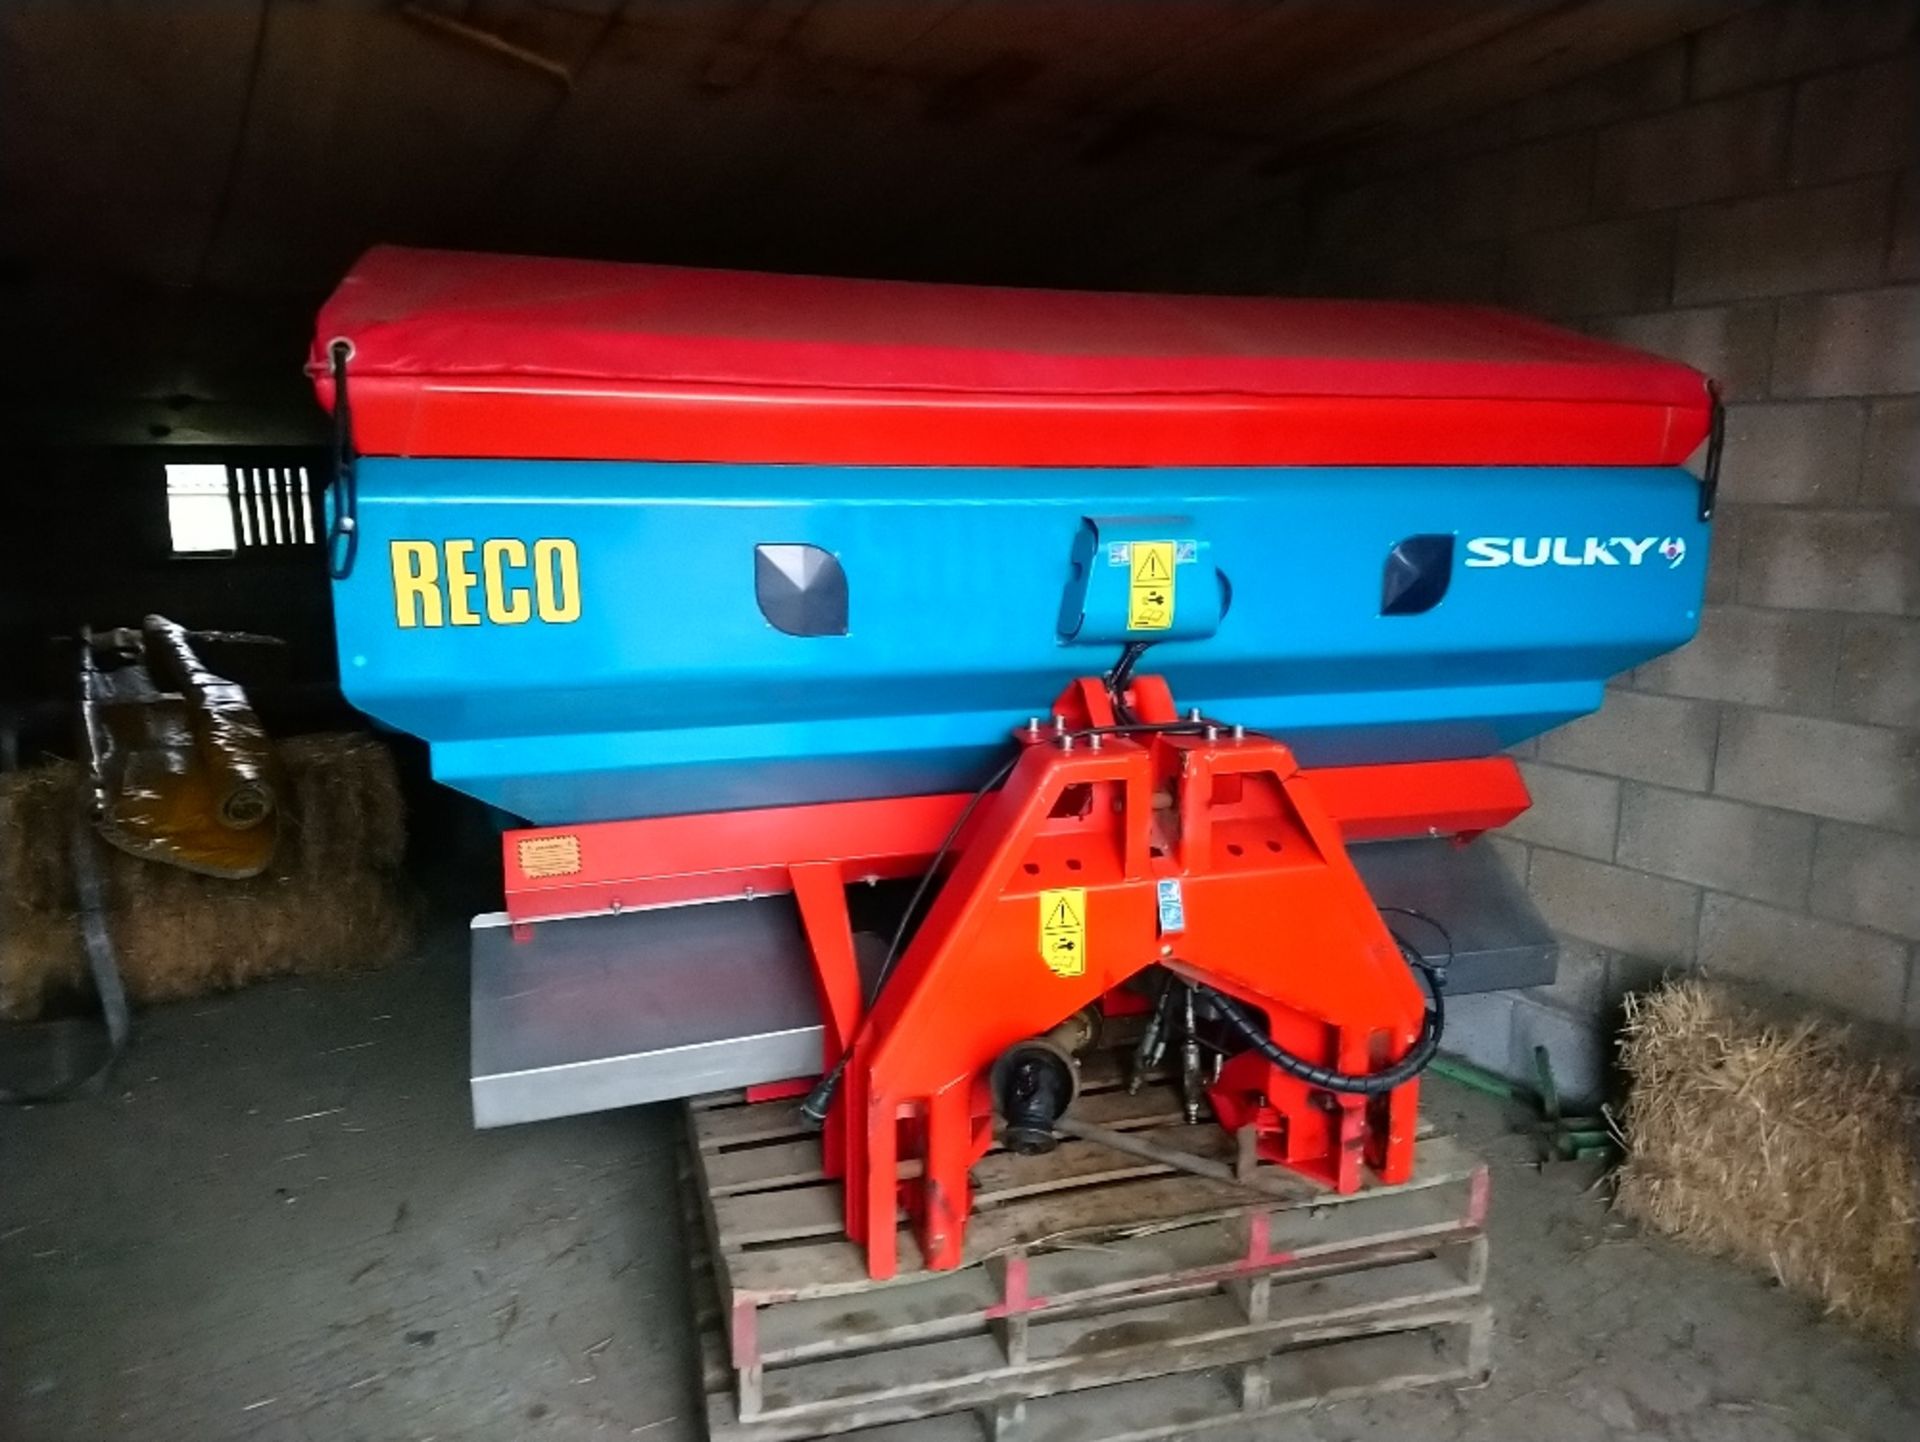 Reco Sulky X36 mounted twin disc fertiliser spreader SN 08/BD 03 142 c/w control box and